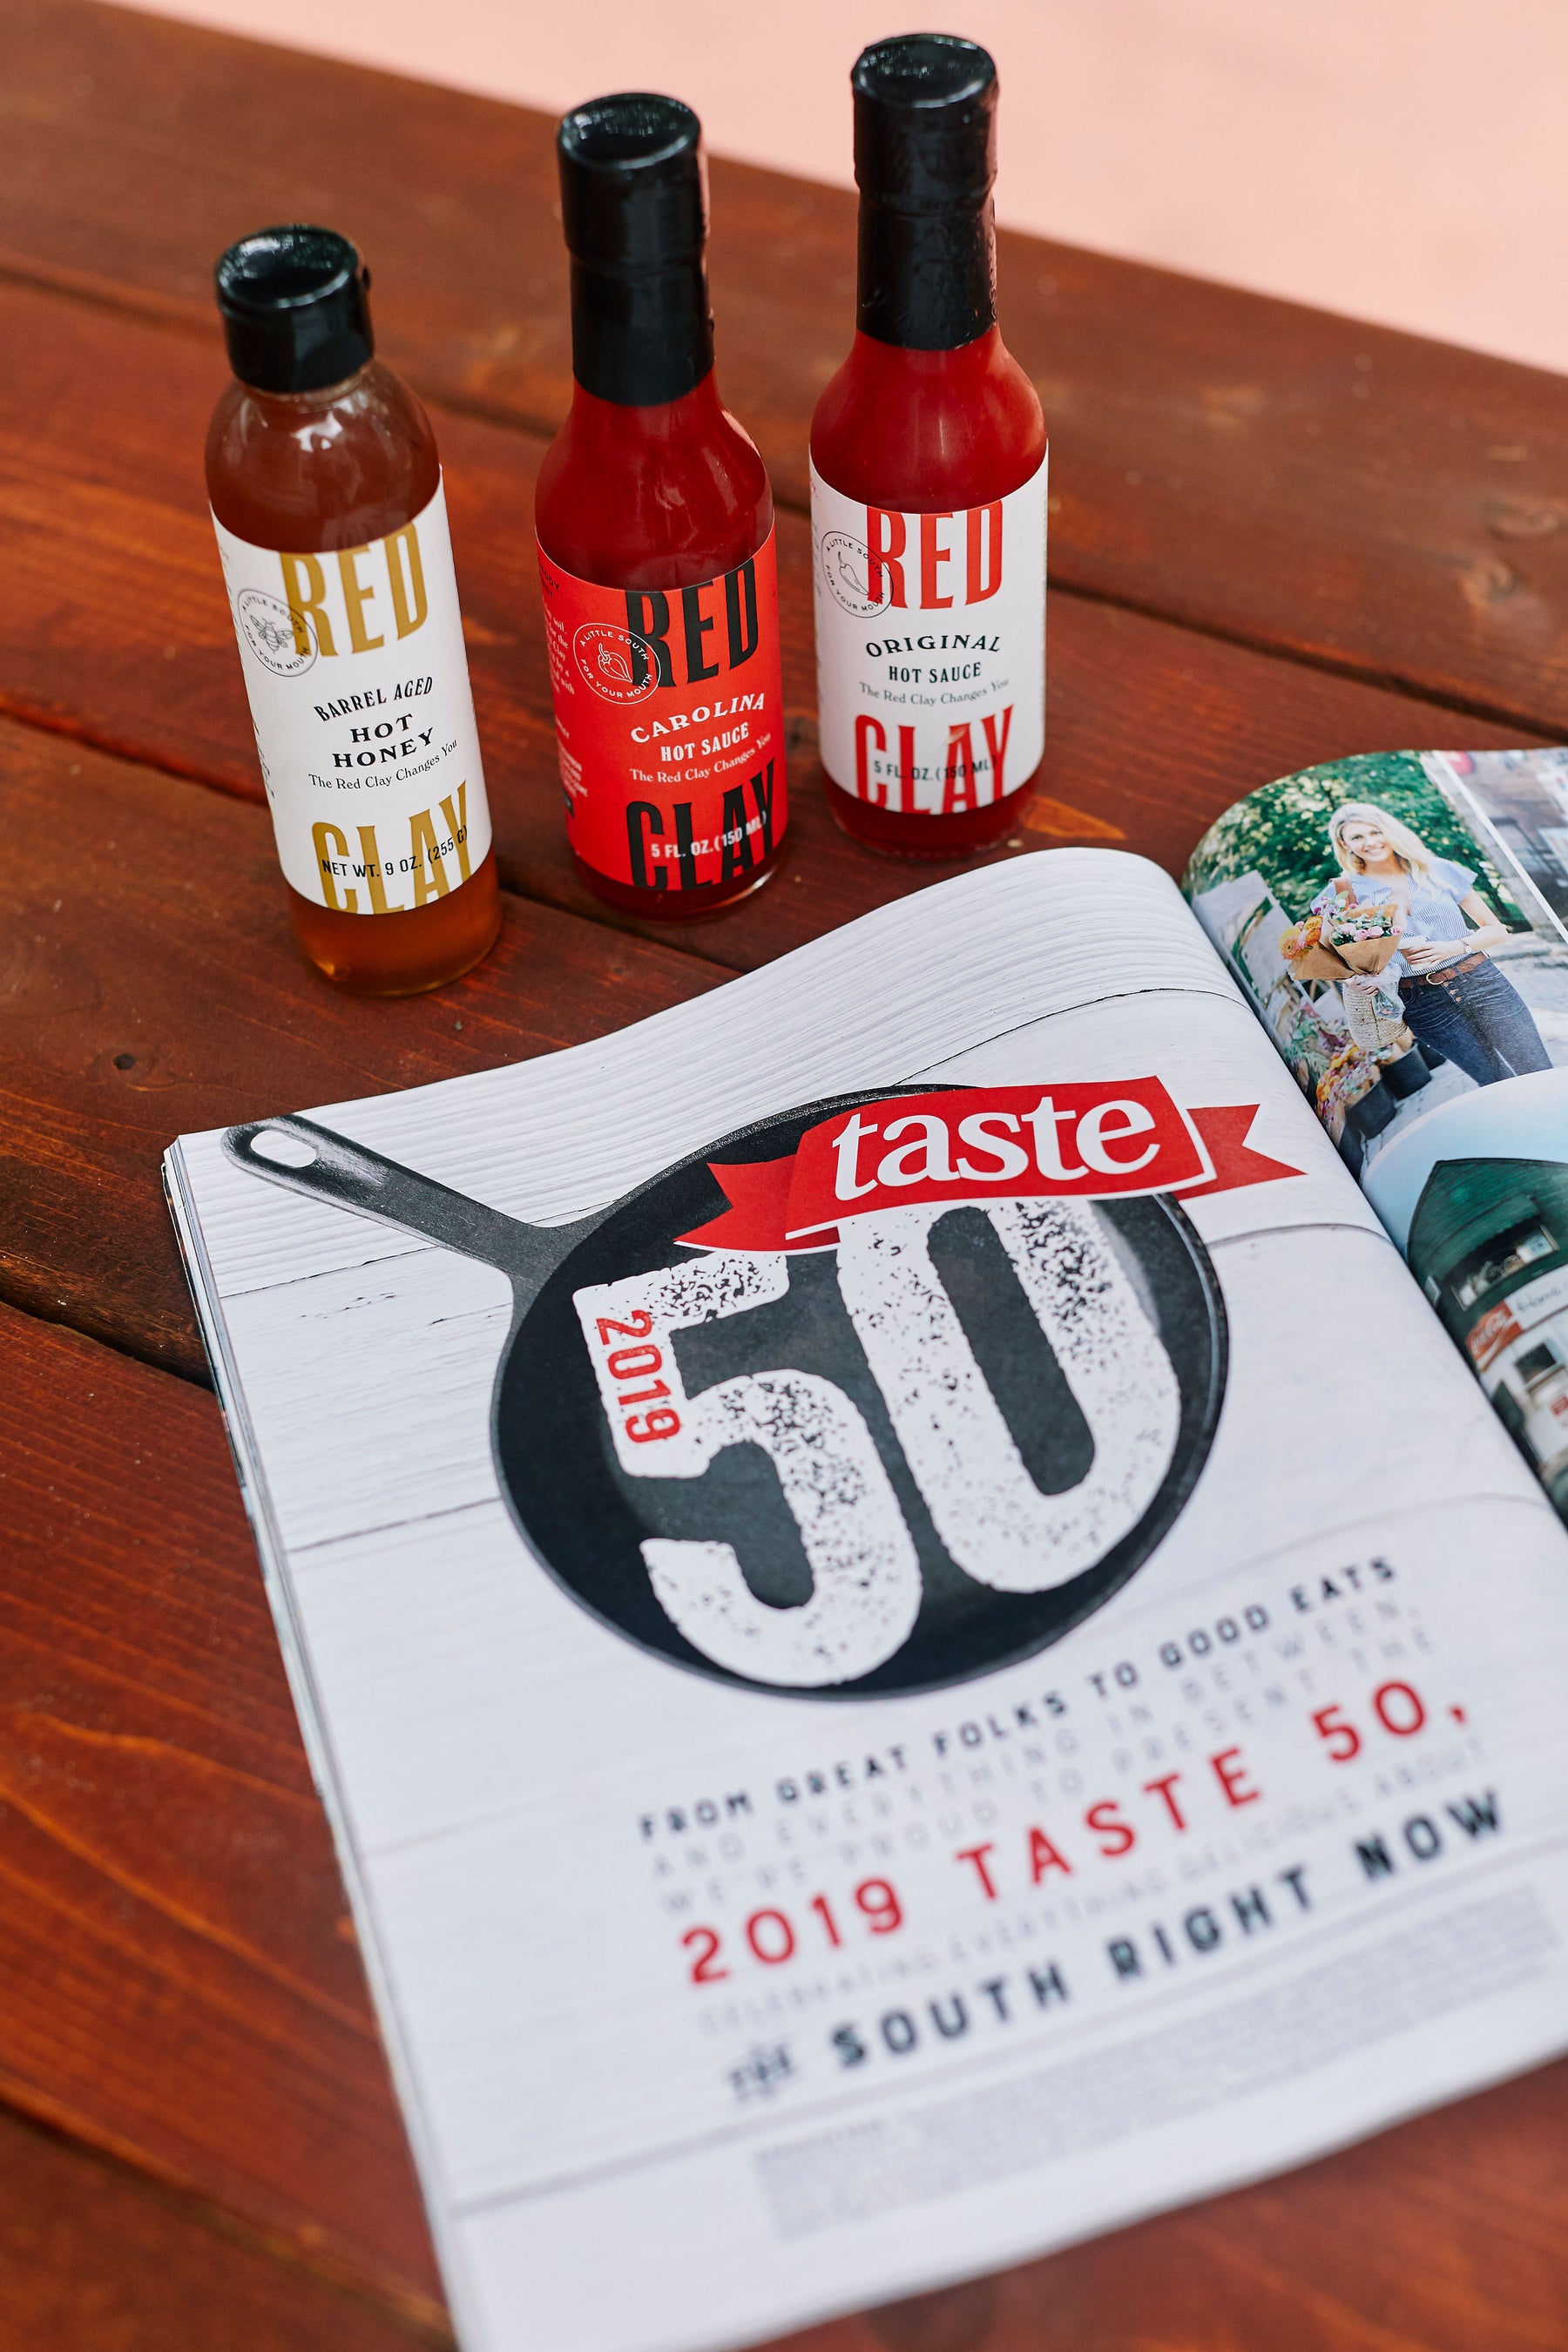 Red Clay named “Best of the South” 2019 by Taste of the South